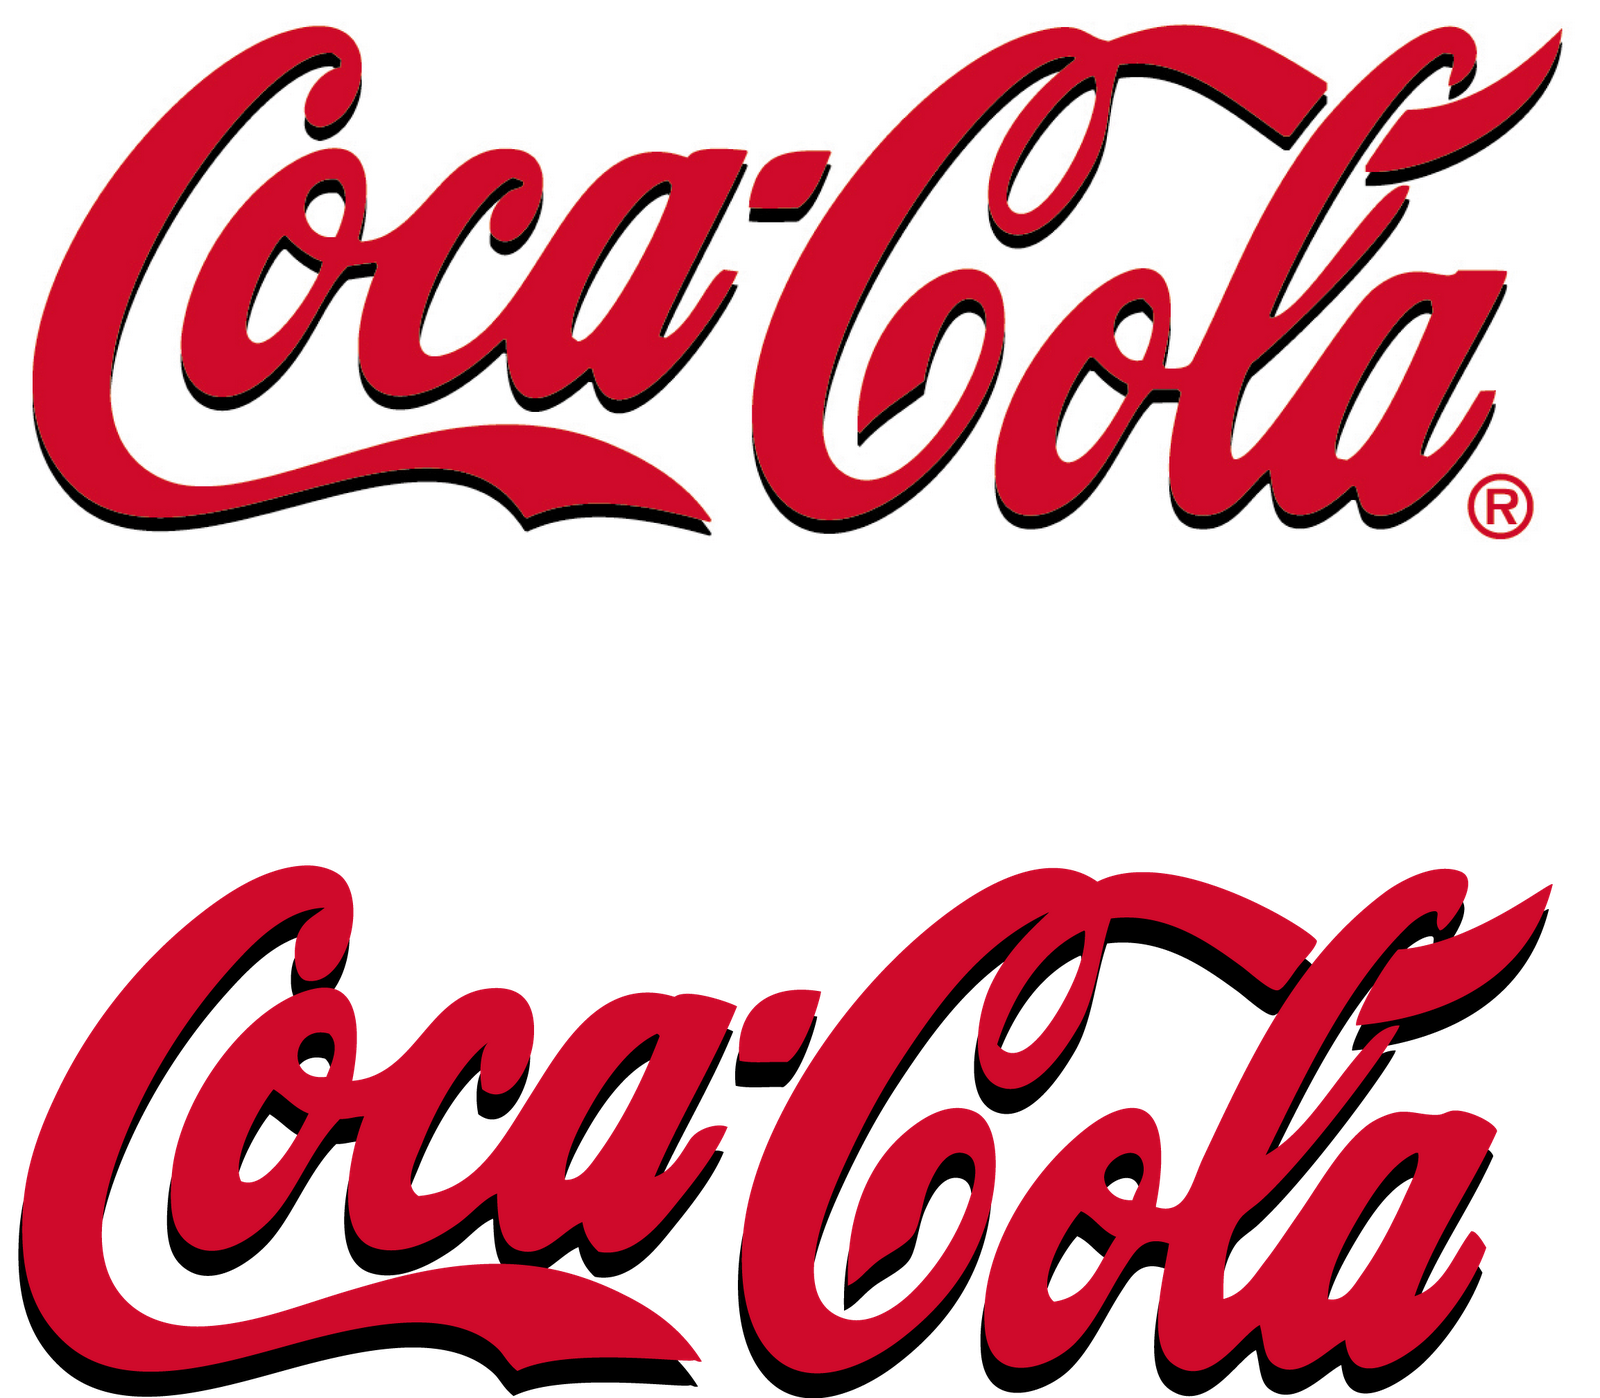 Coca Cola Logo Download Clipart Png #12744 - Free Icons and PNG Backgrounds